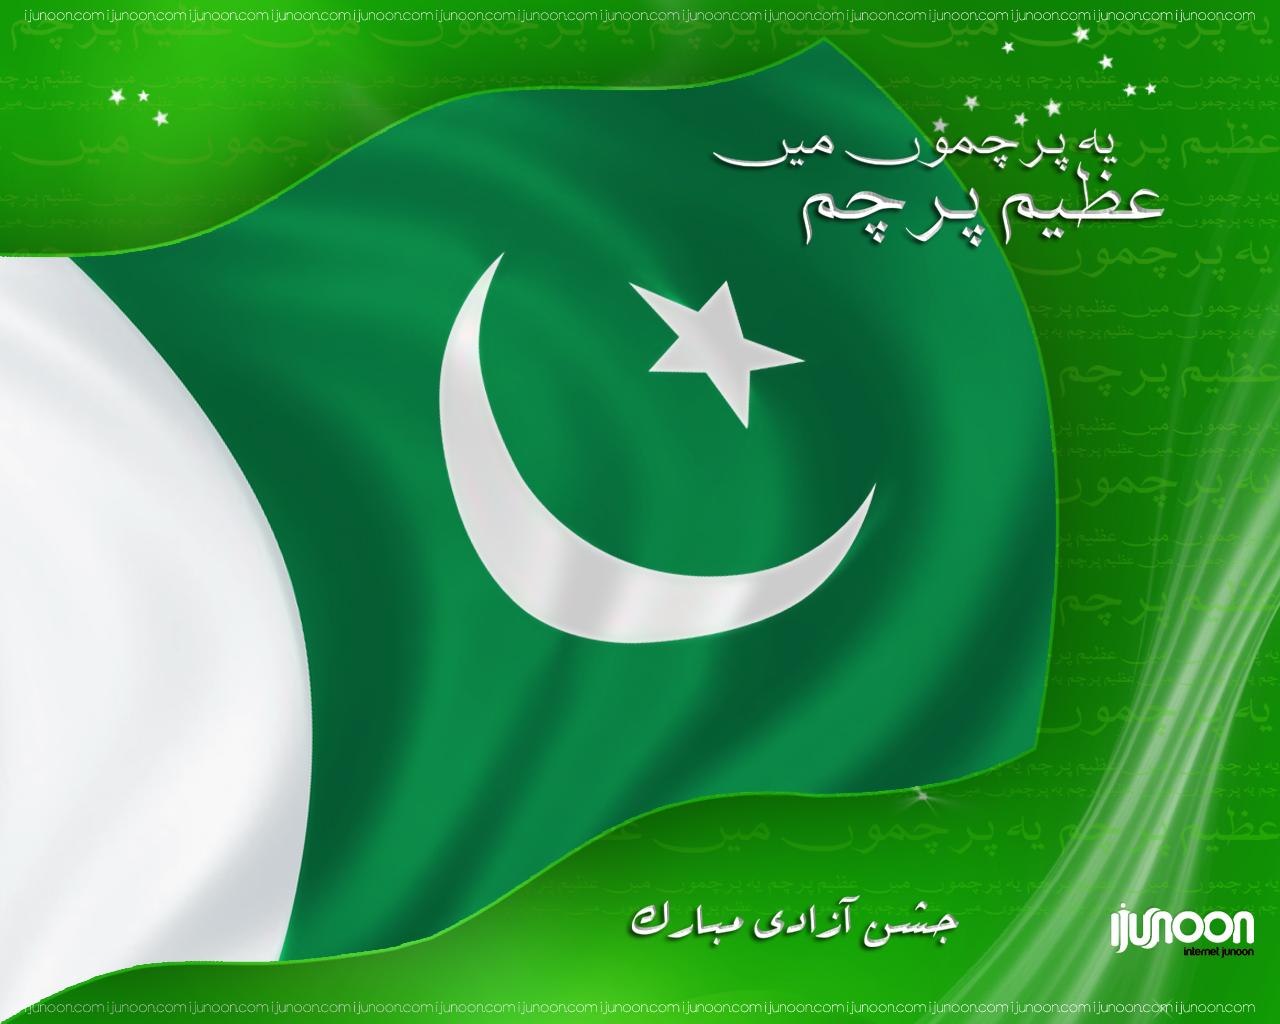 Free download 20 Wallpaper And Image Pakistan Day 23 March